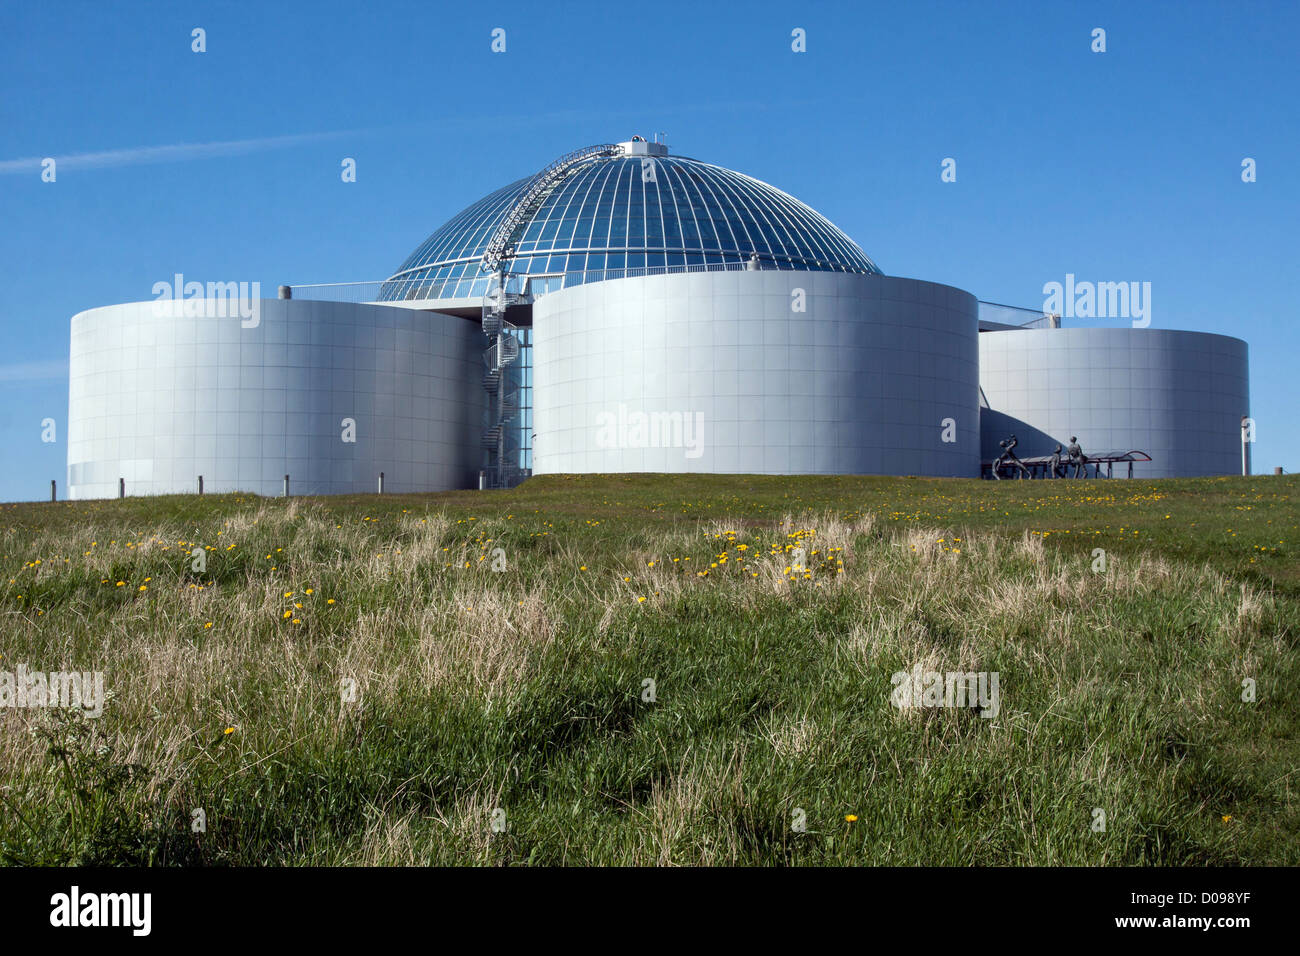 VIEW OF THE PERLAN GEOTHERMIC HOT WATER RESERVOIR OVERLOOKED BY A RESTAURANT AND OBSERVATORY OSKJUHLID HILL REYKJAVIK ICELAND Stock Photo